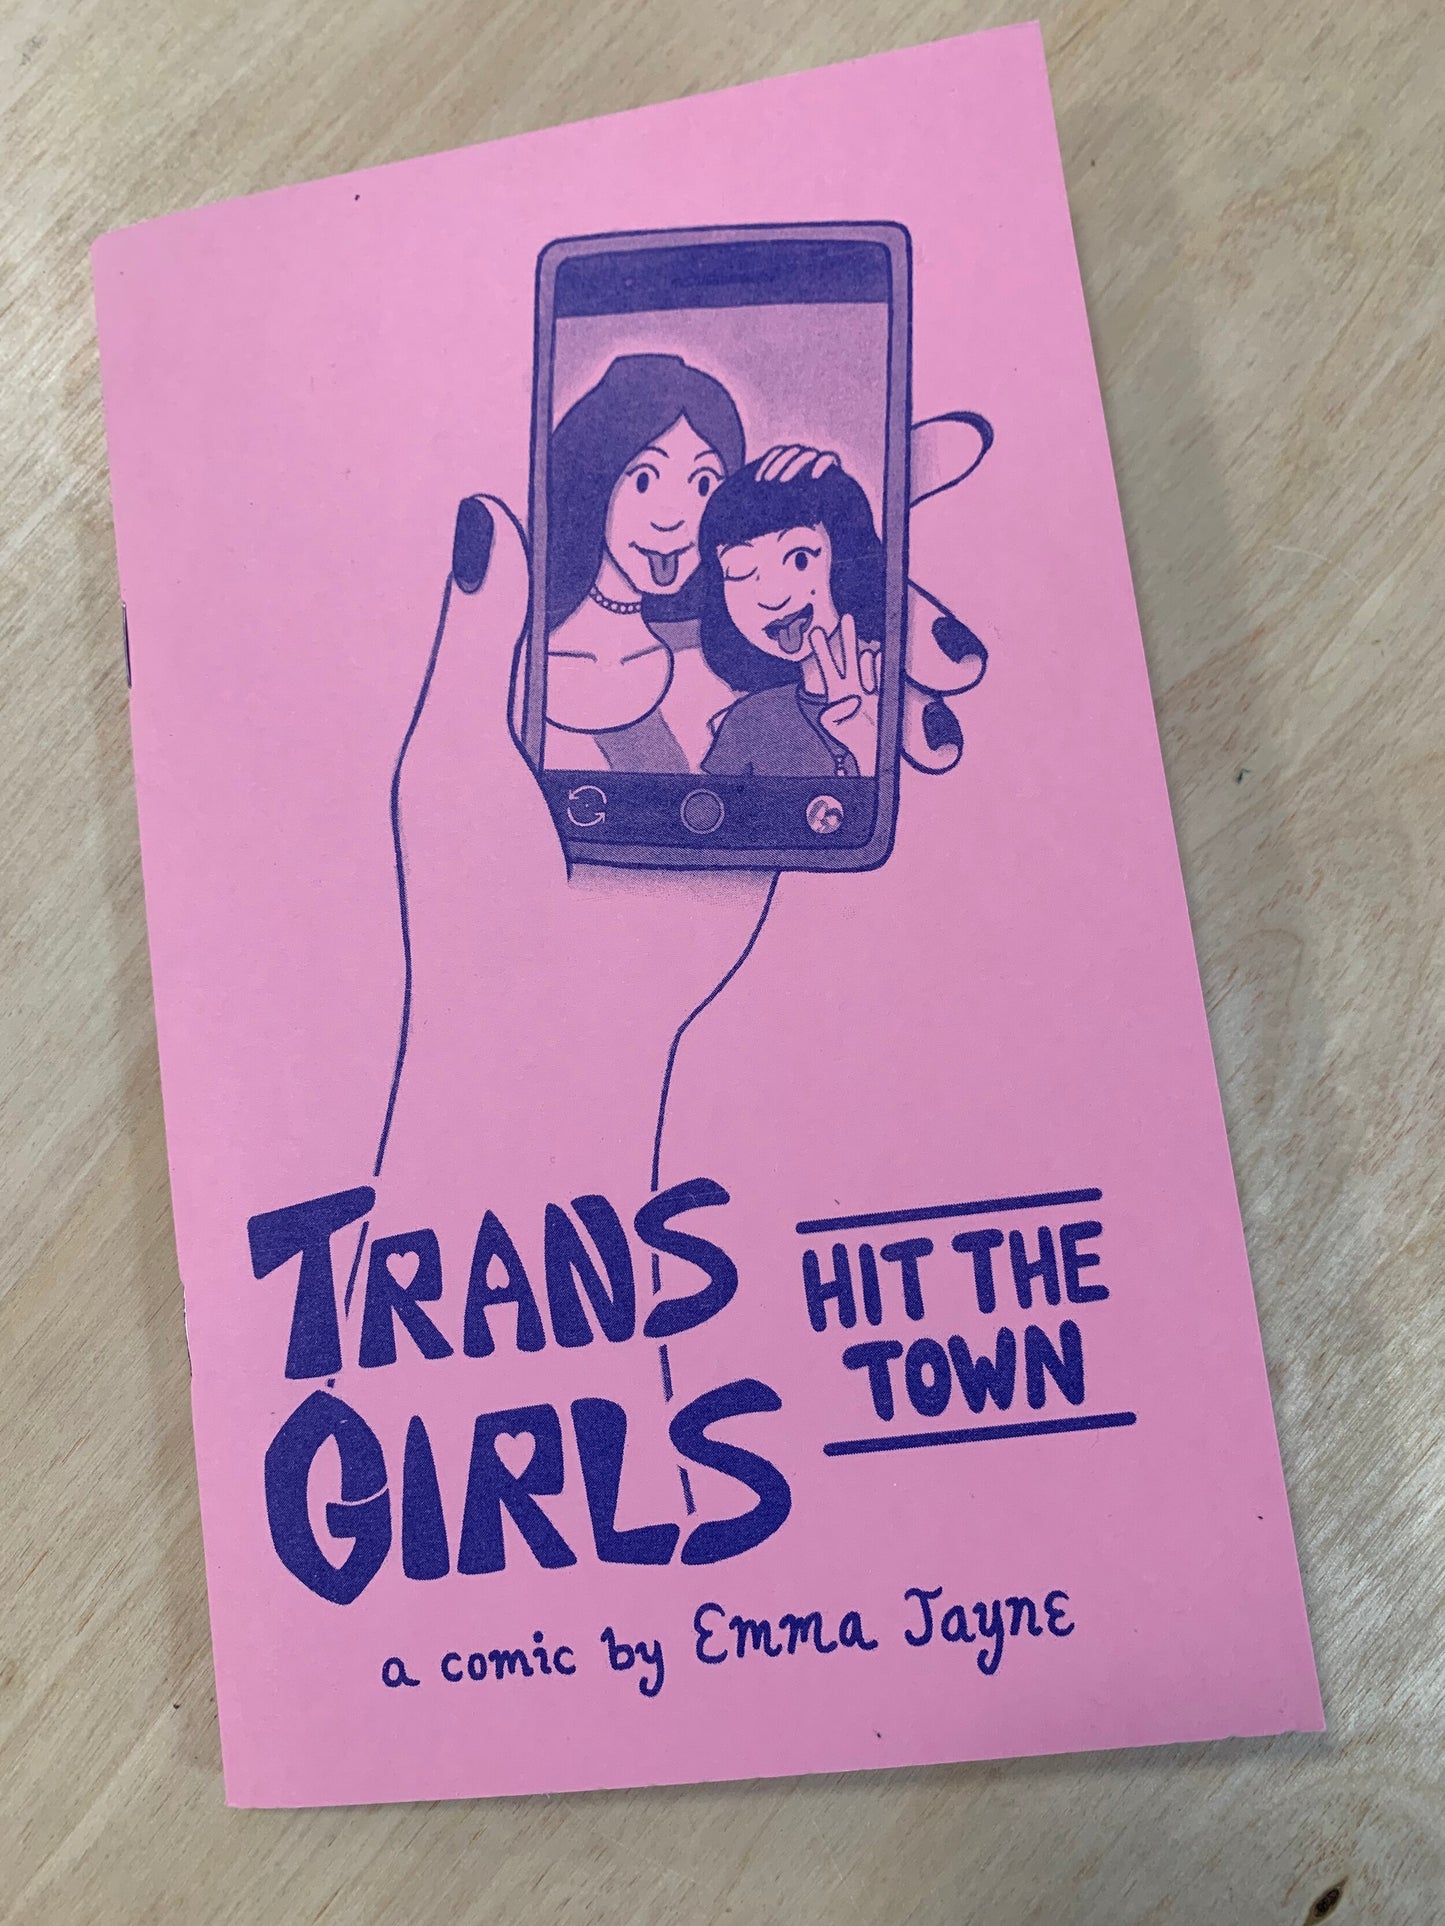 Trans Girls Hit The Town